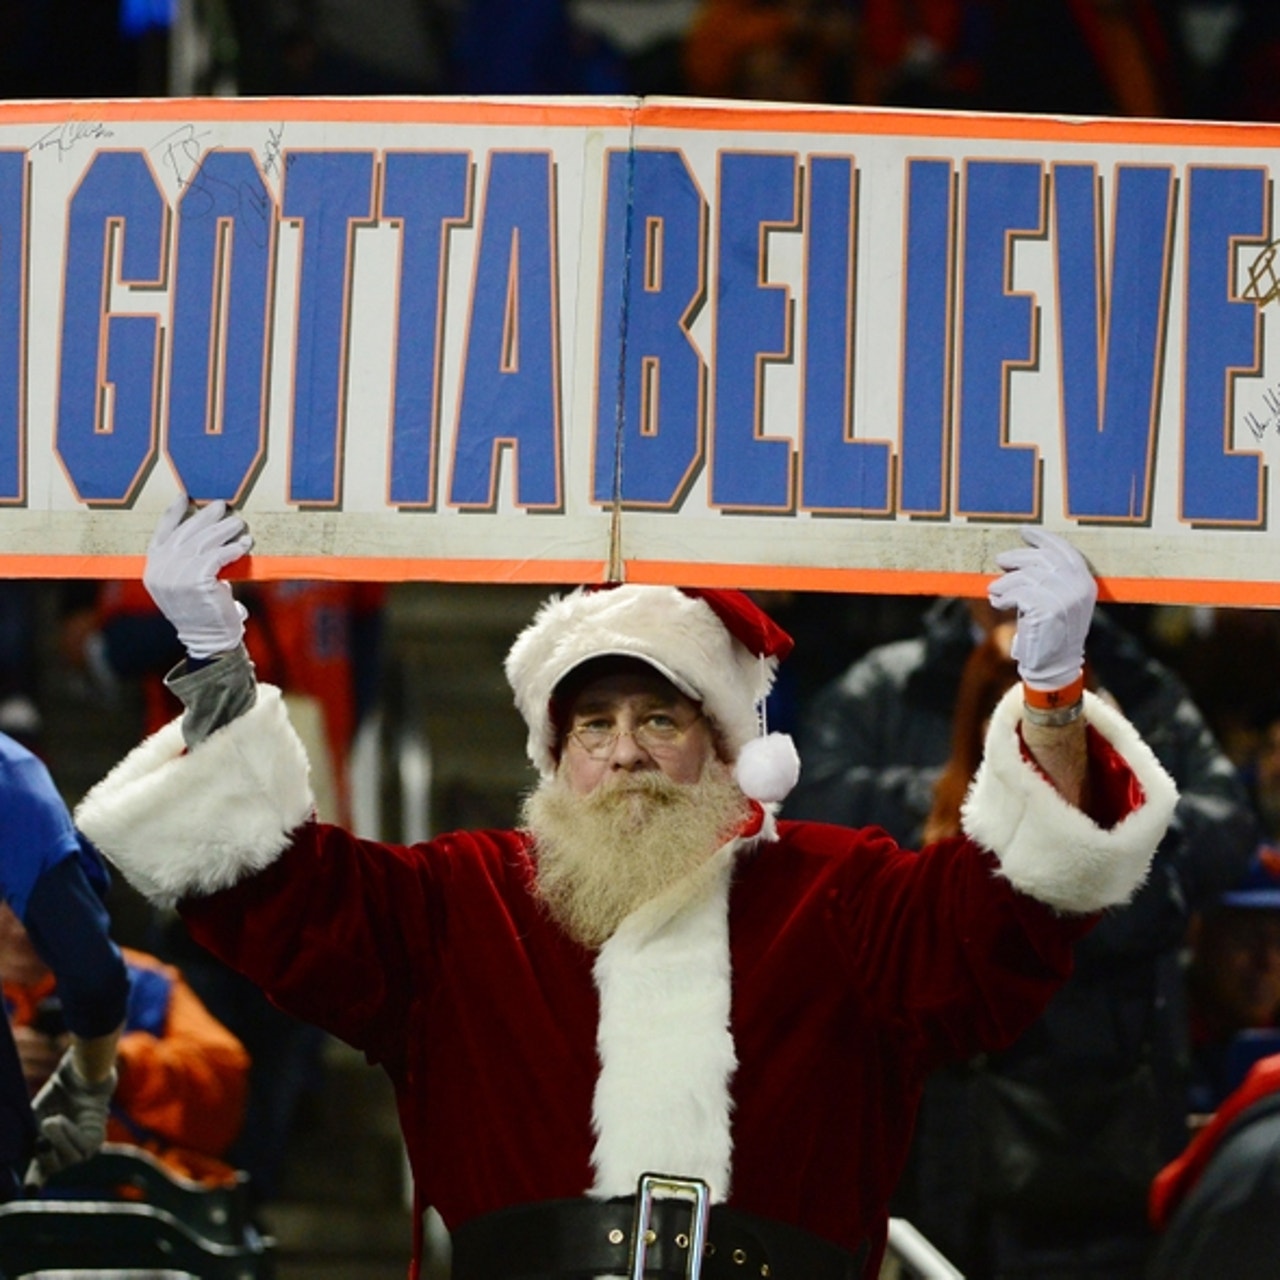 Edmonton Oilers Even Santa Claus Cheers For Christmas NHL Shirt For Fans